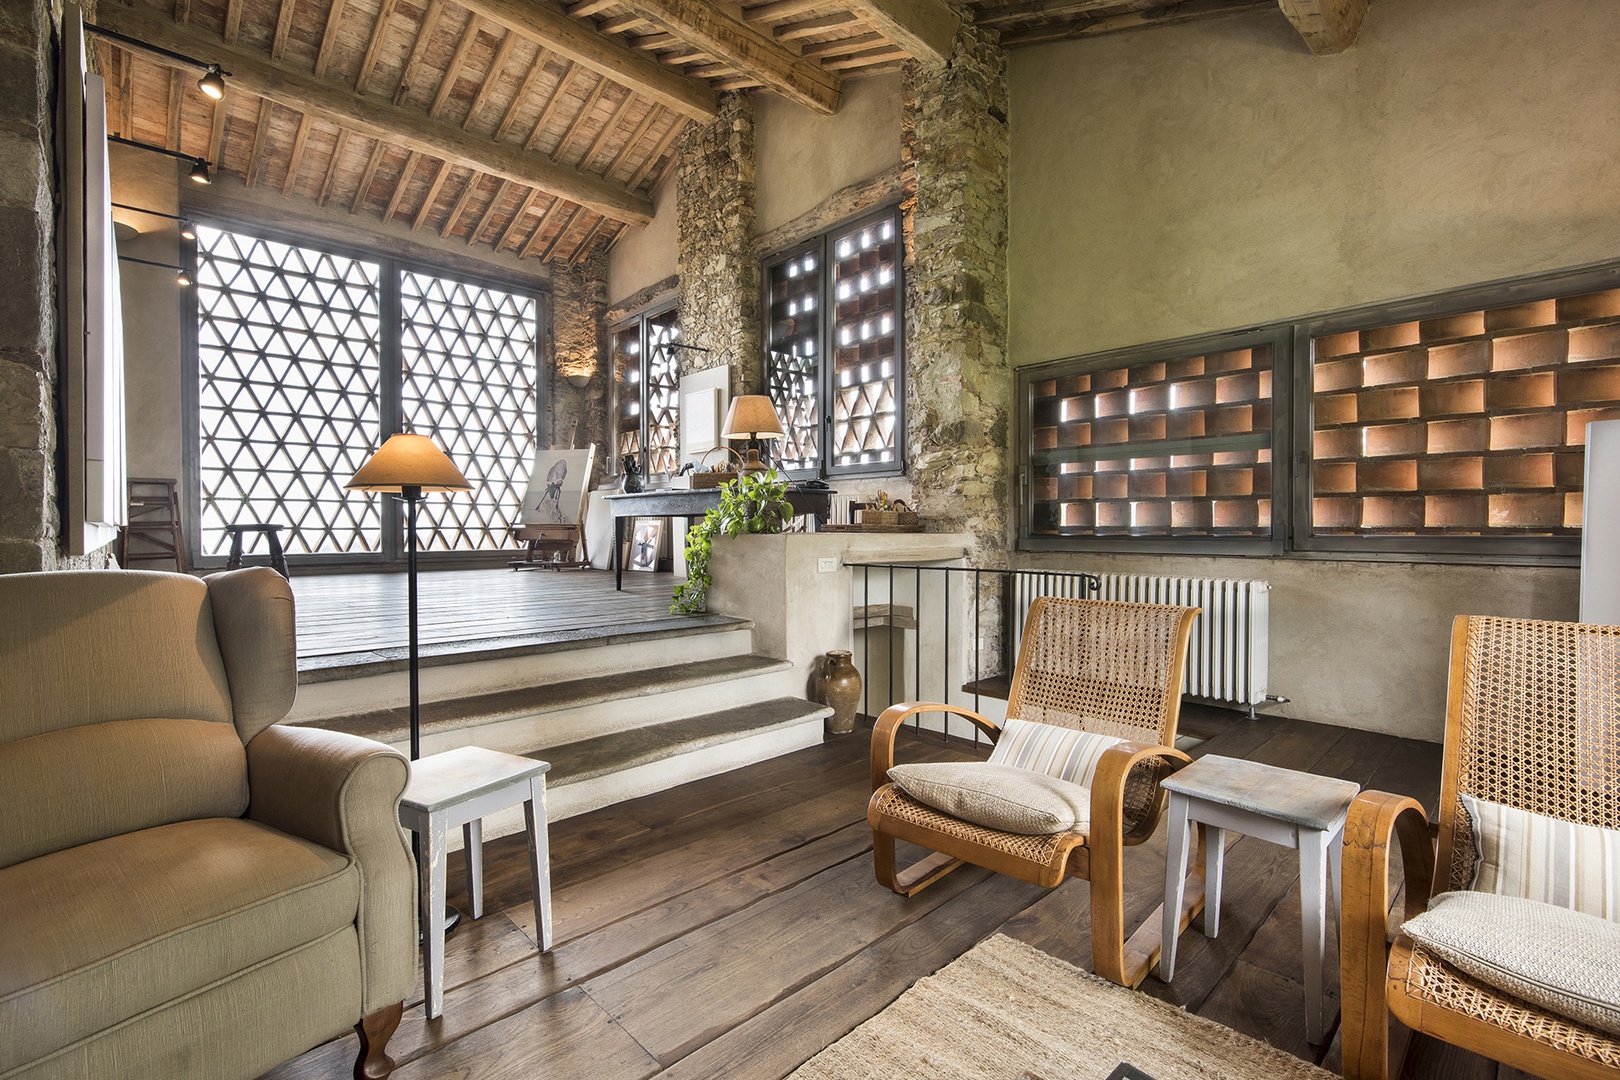 Planked wood floors and preserved Tuscan brickwork add to the charm of the Coratina Villa